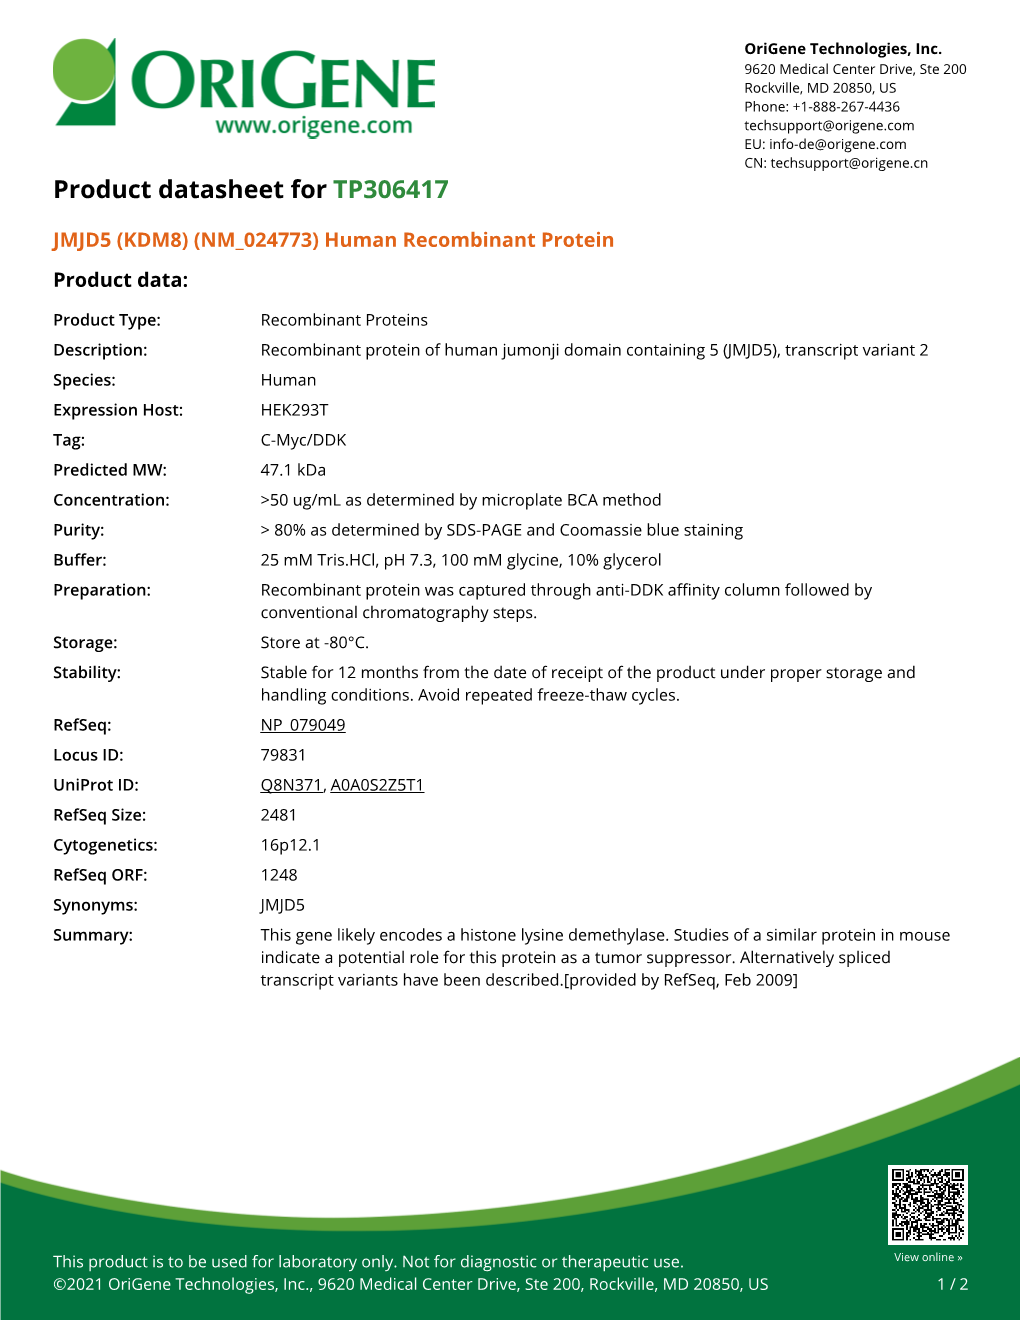 JMJD5 (KDM8) (NM 024773) Human Recombinant Protein Product Data